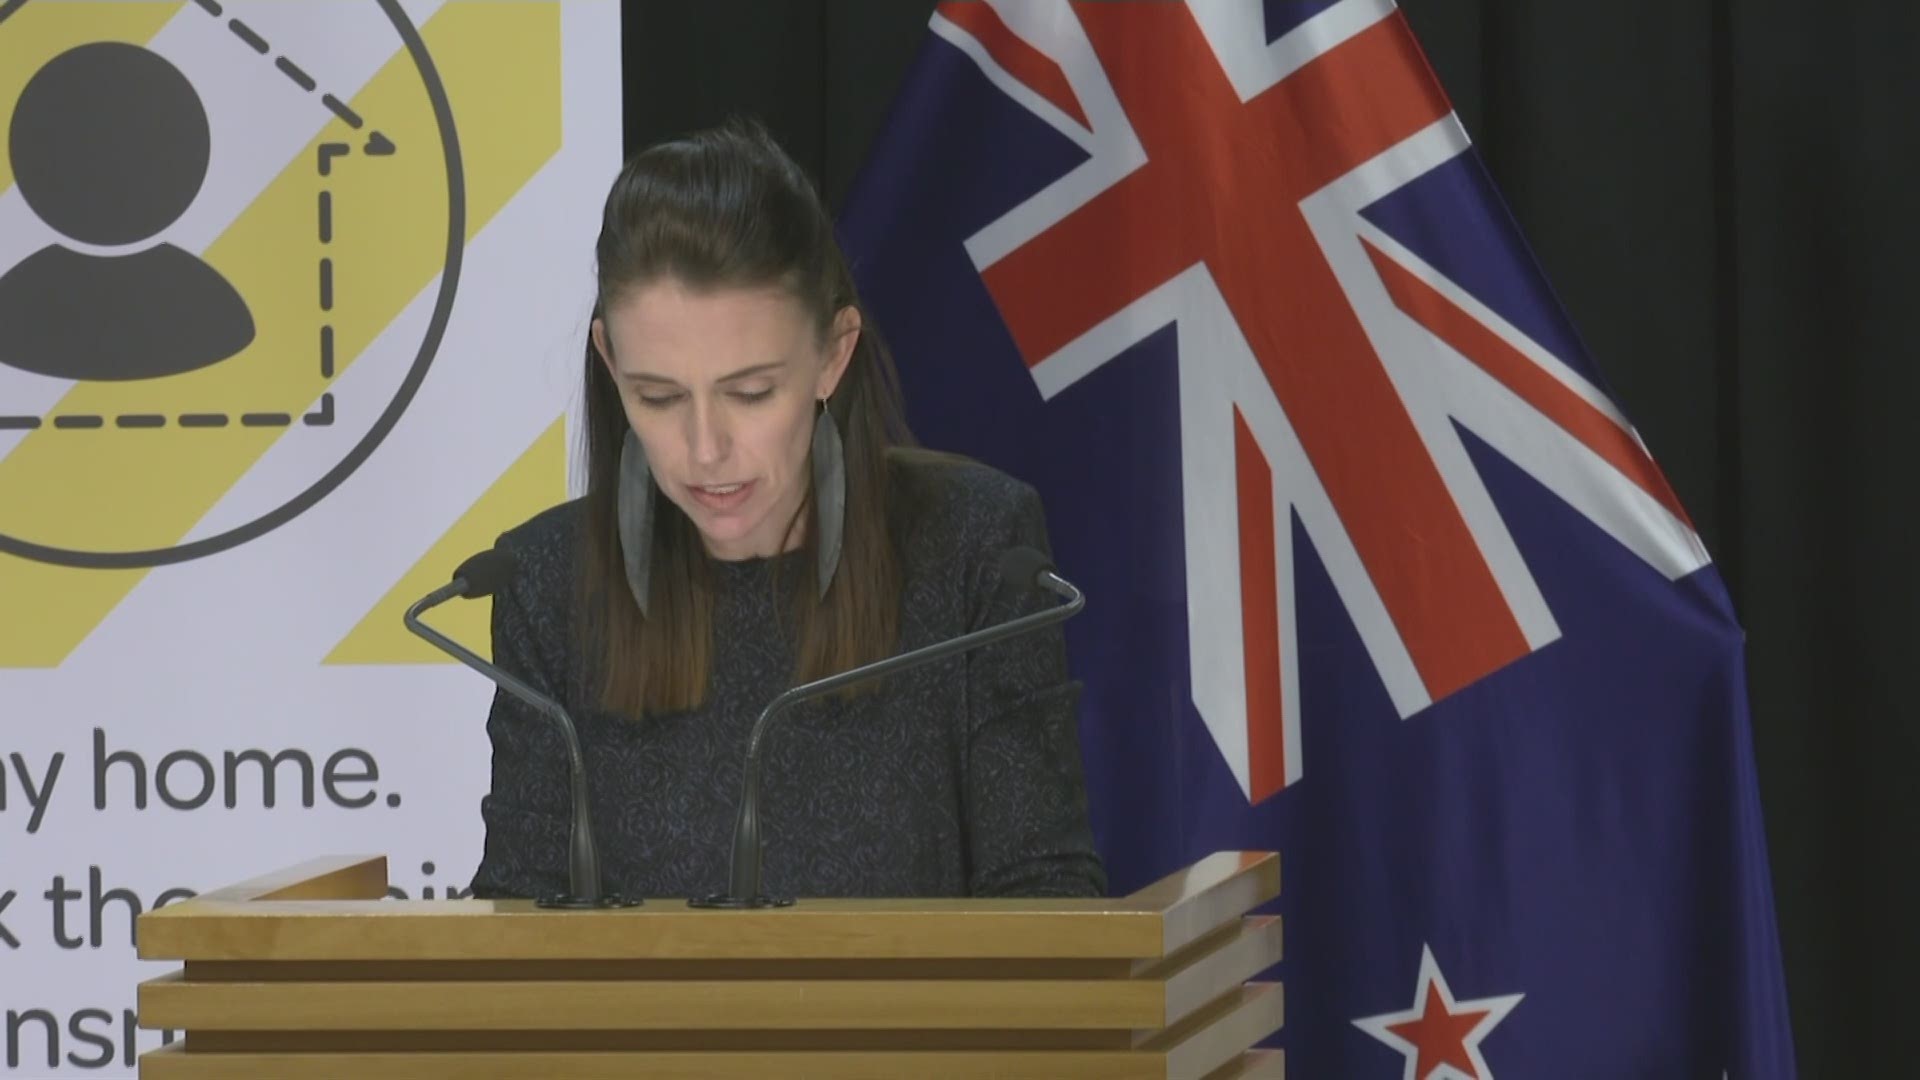 New Zealand Prime Minister Jacinda Ardern on Wednesday confirmed she and other top officials are taking a 20% pay cut for six months